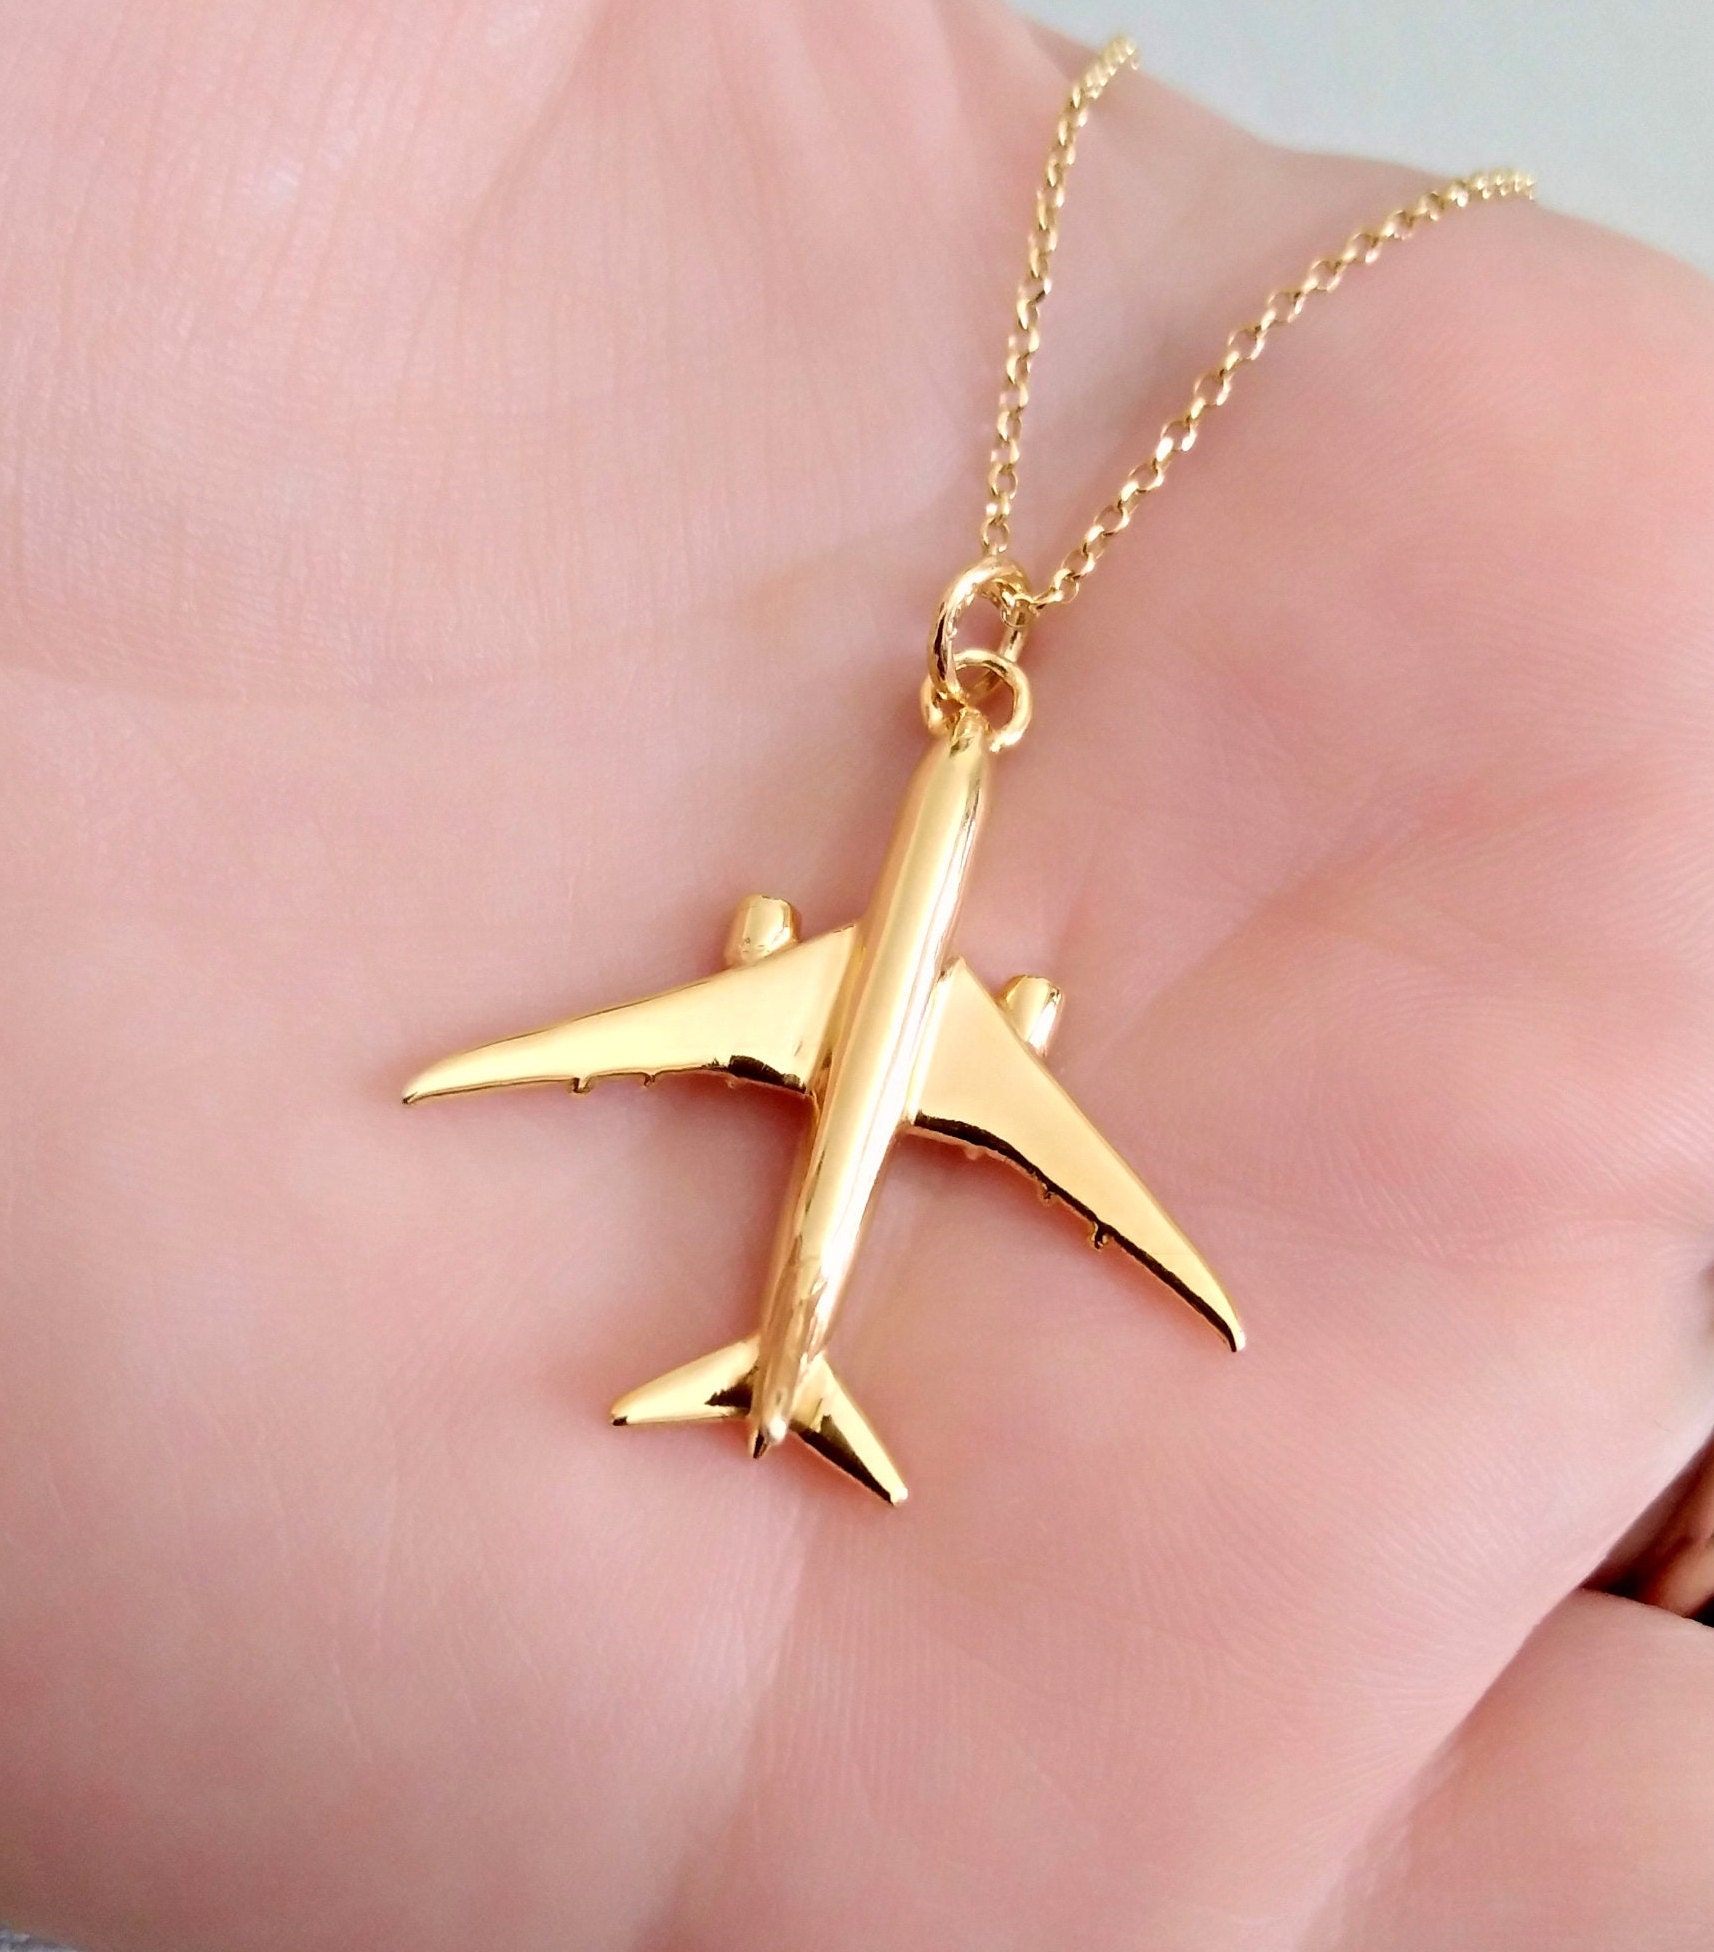 Space and Aviation Airplane Aircraft Pendant Necklace